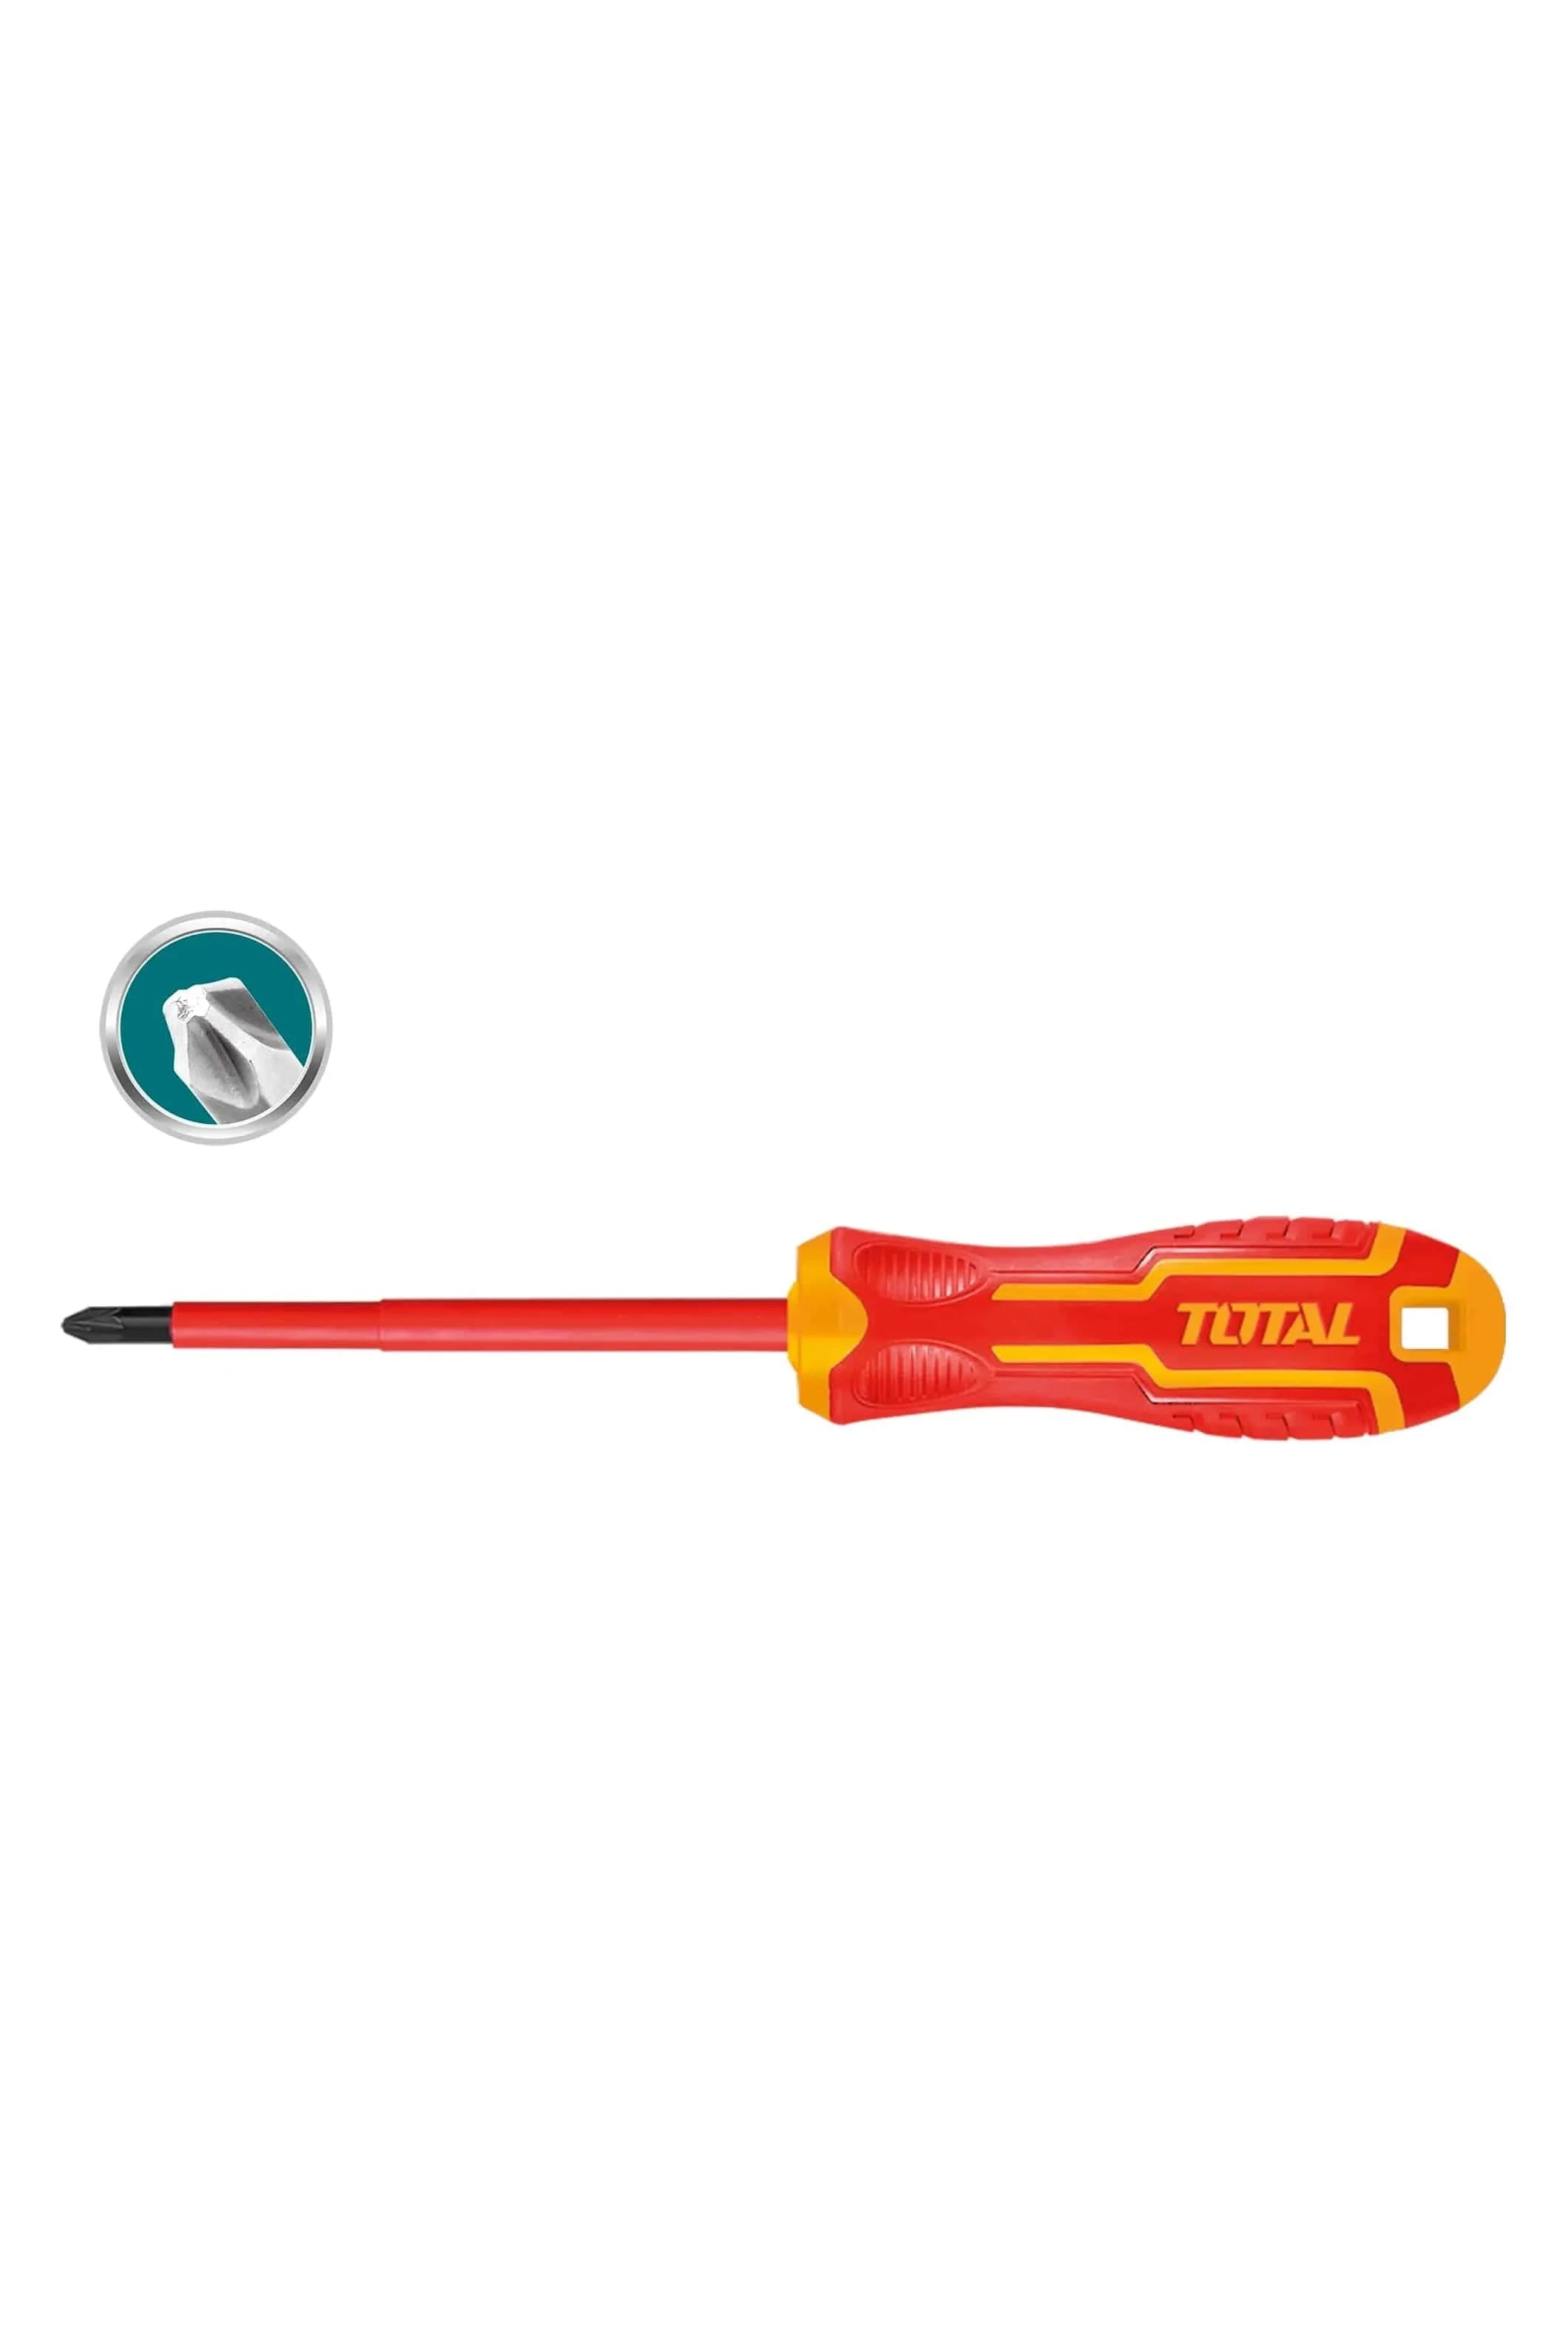 TOTAL INSULATED SCREWDRIVER PH2×100 - Elite Renewable Solutions